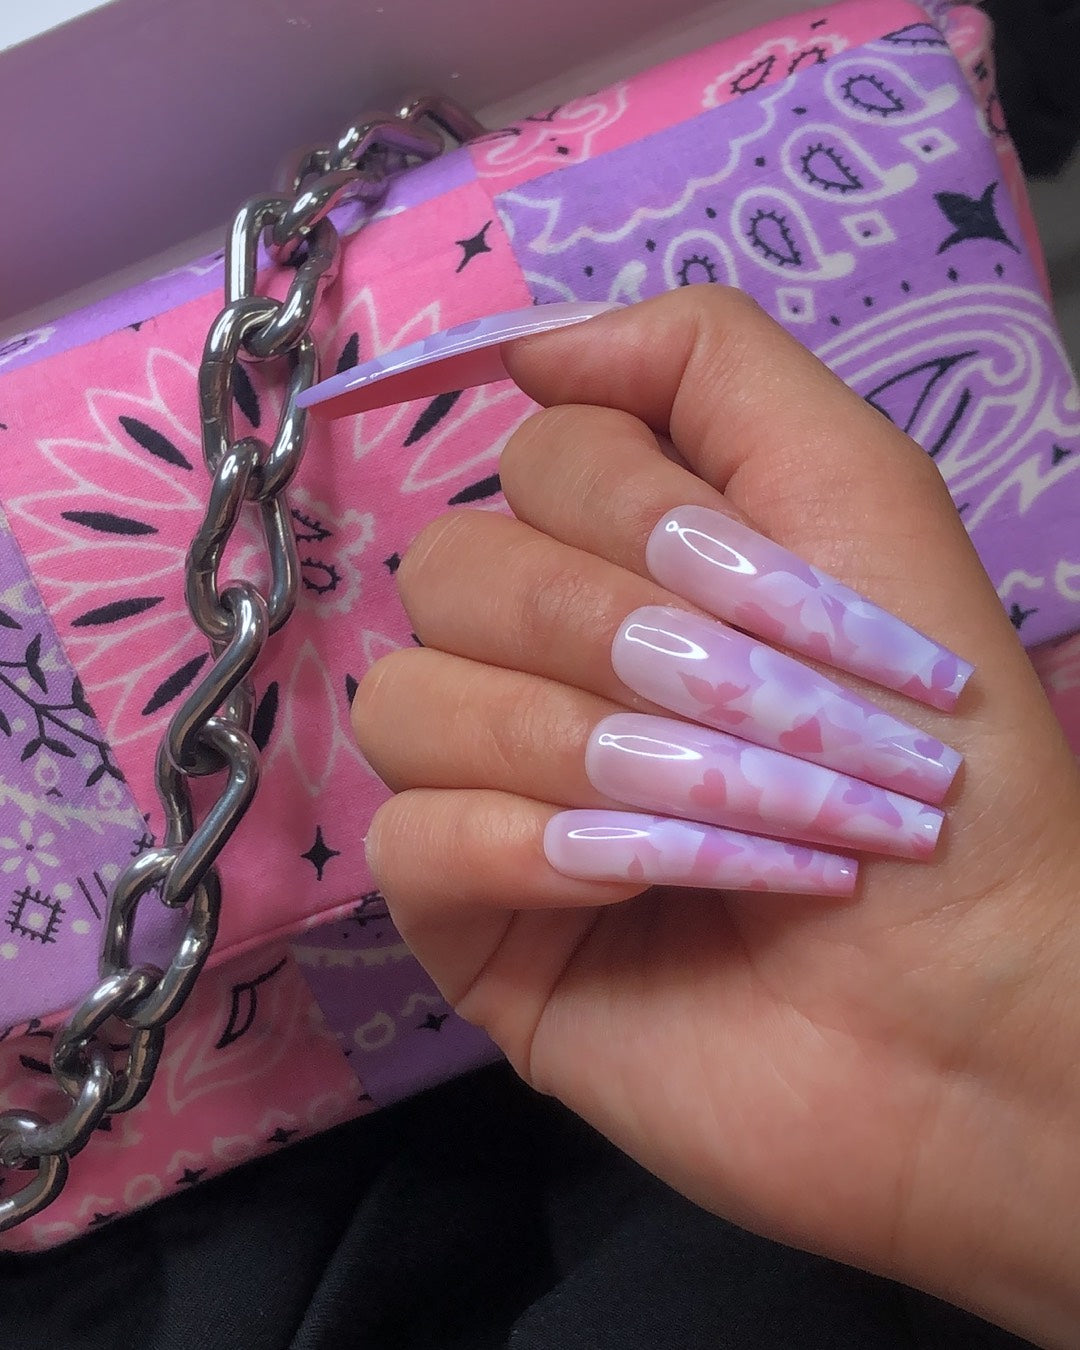 This Little Girl Comfortably Show Off Her Artificial Nails Online - Photos  - Gistmania